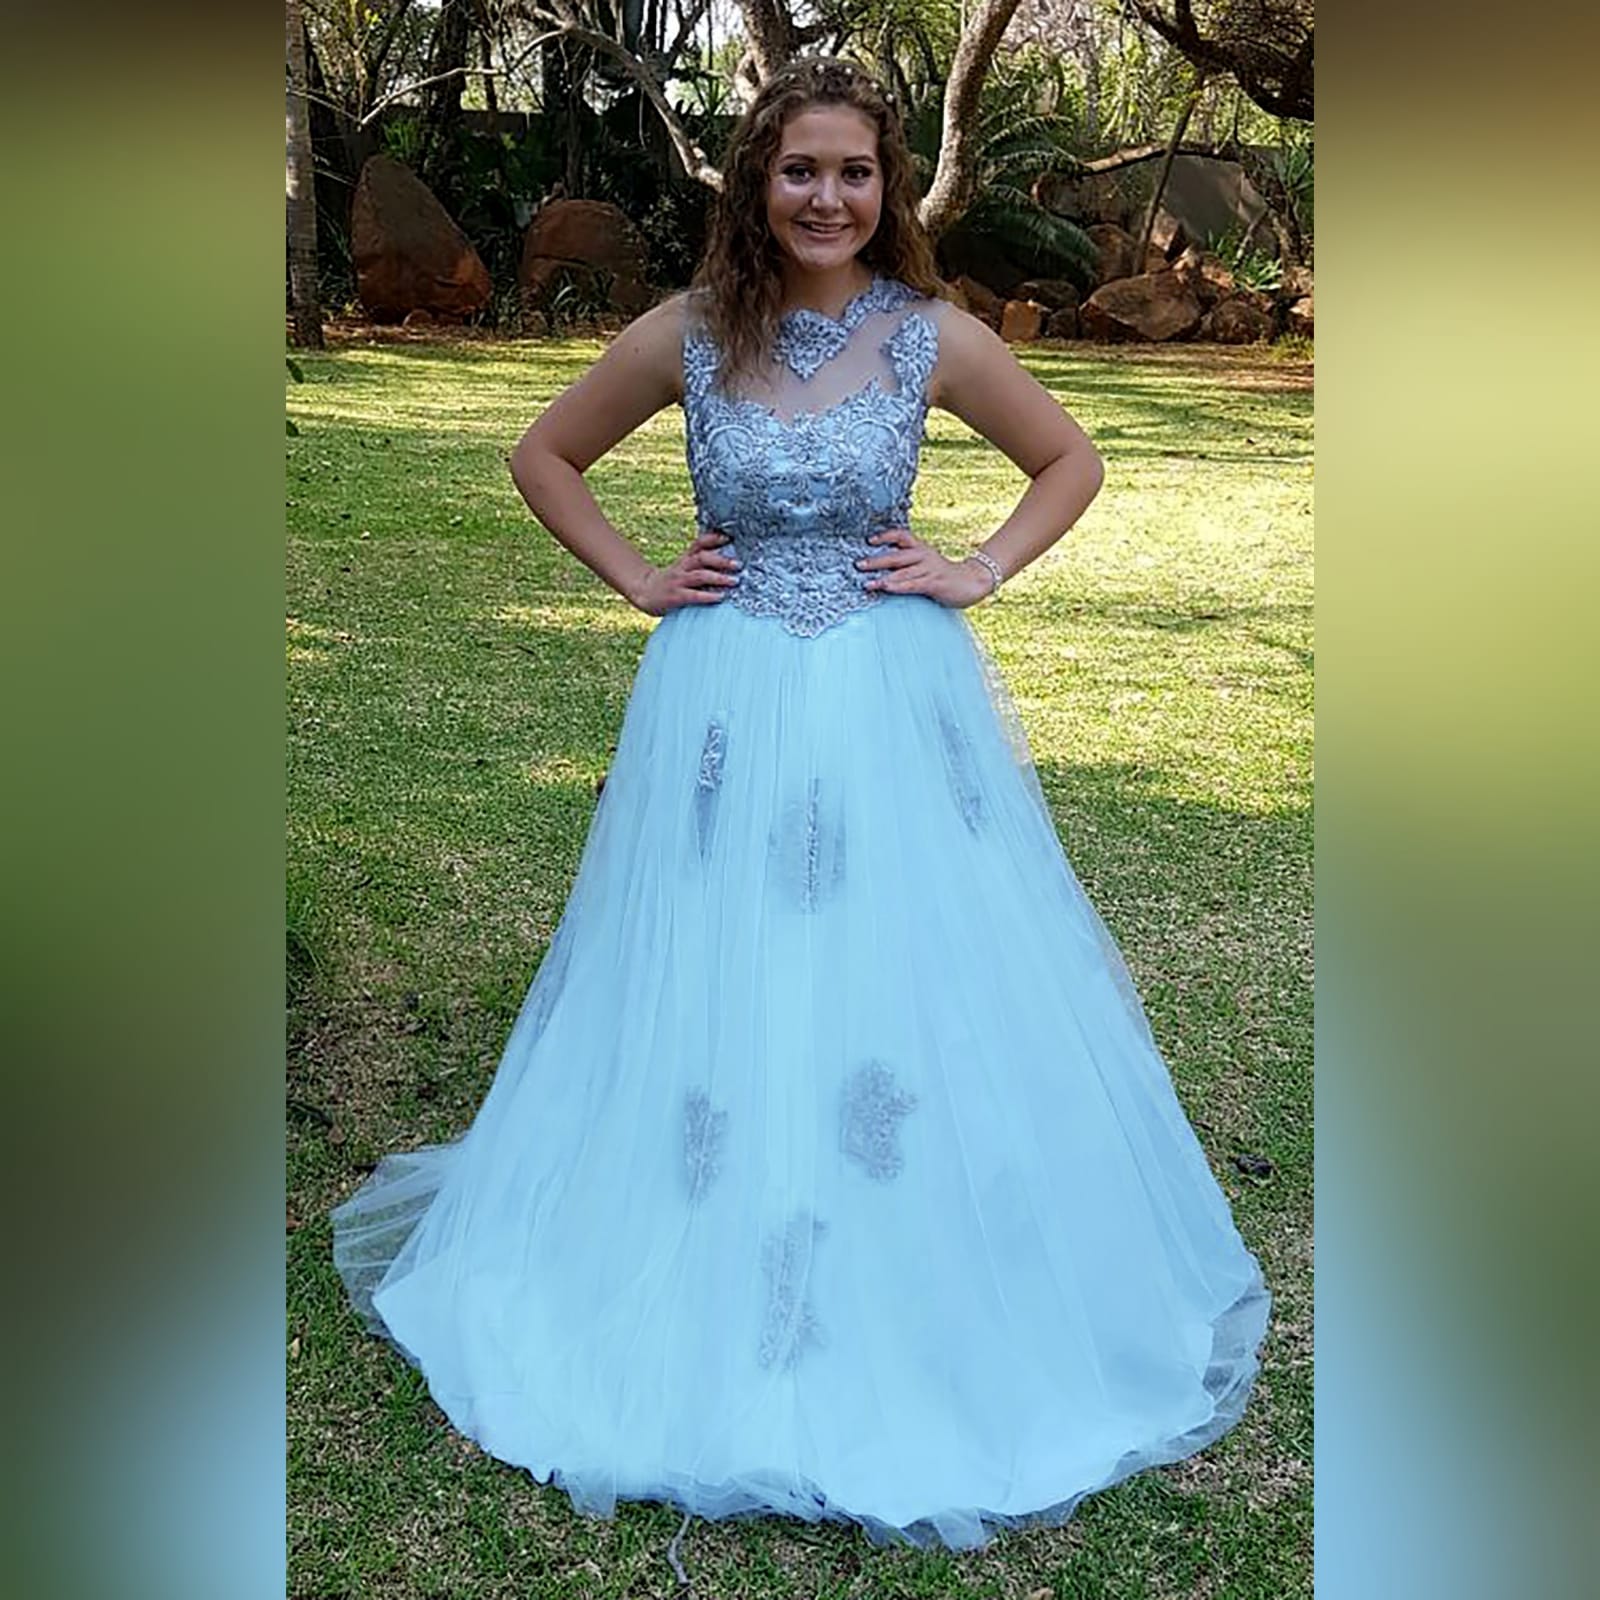 Powder blue and silver prom ball gown dress 5 powder blue and silver prom ball gown dress. With a lace-up back. Bodice detailed with silver lace and beads. Illusion neckline and shoulders. Bottom of the dress with tulle detailed with lace appliques.